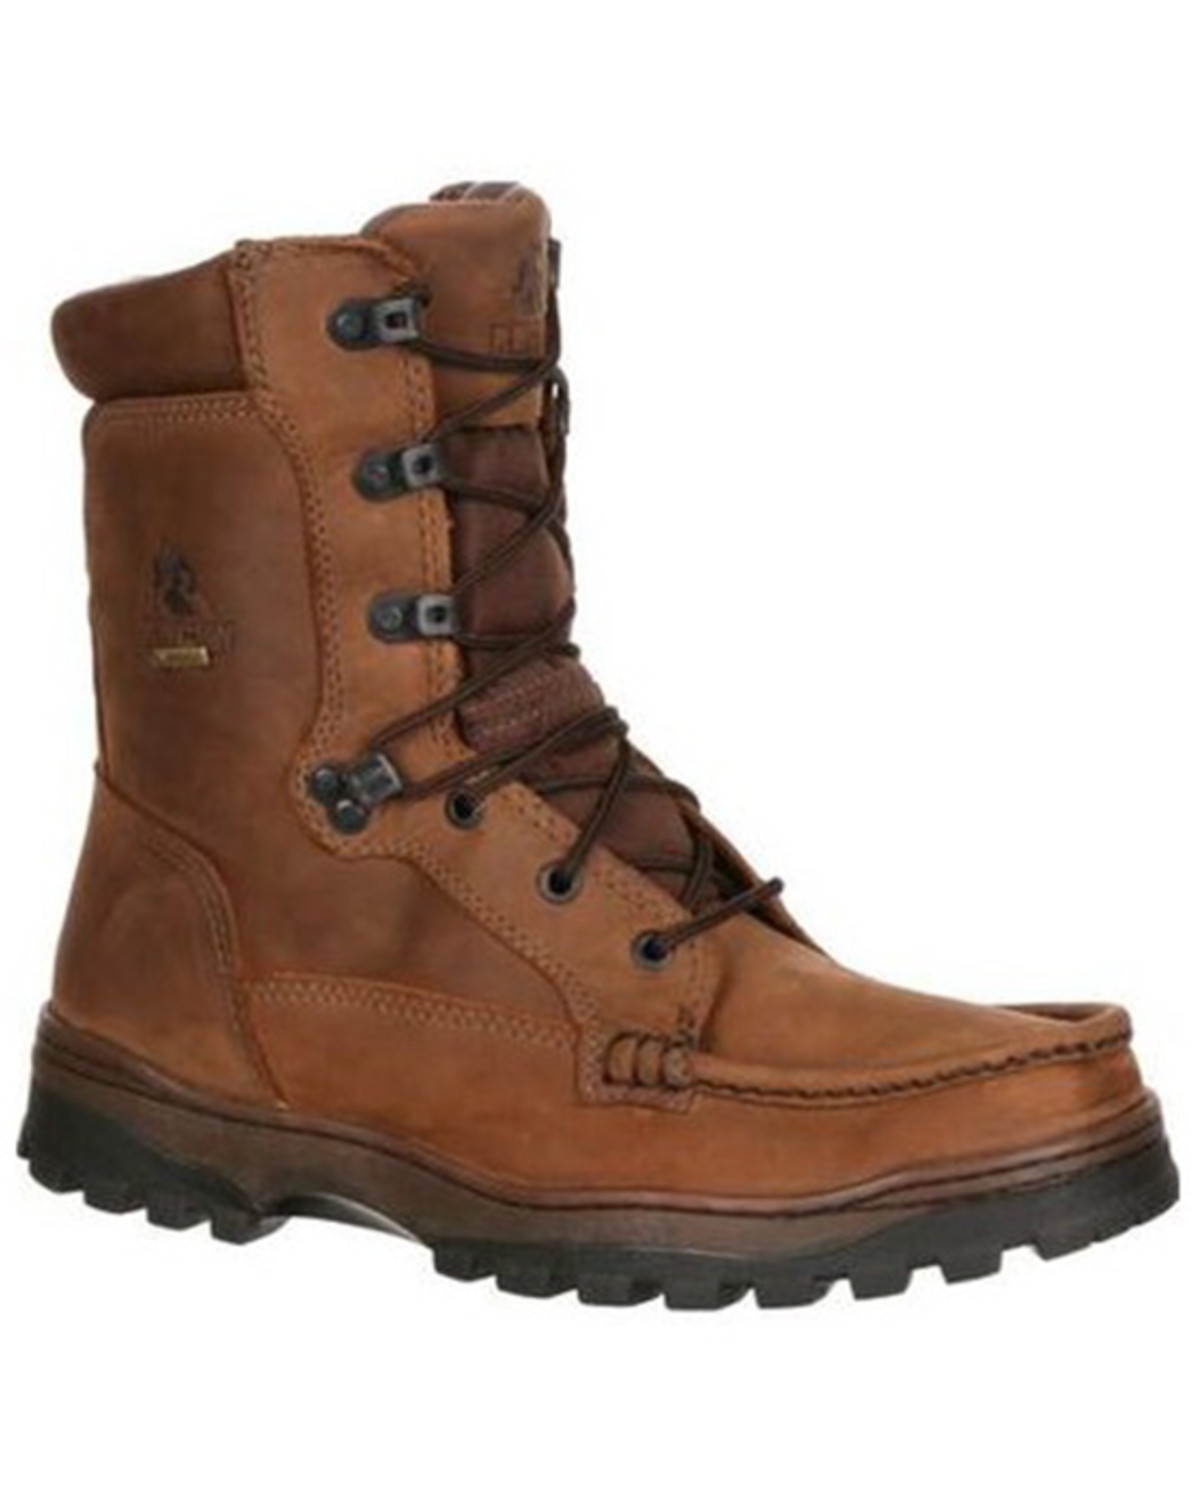 Outback GORE-TEX Waterproof Boots 